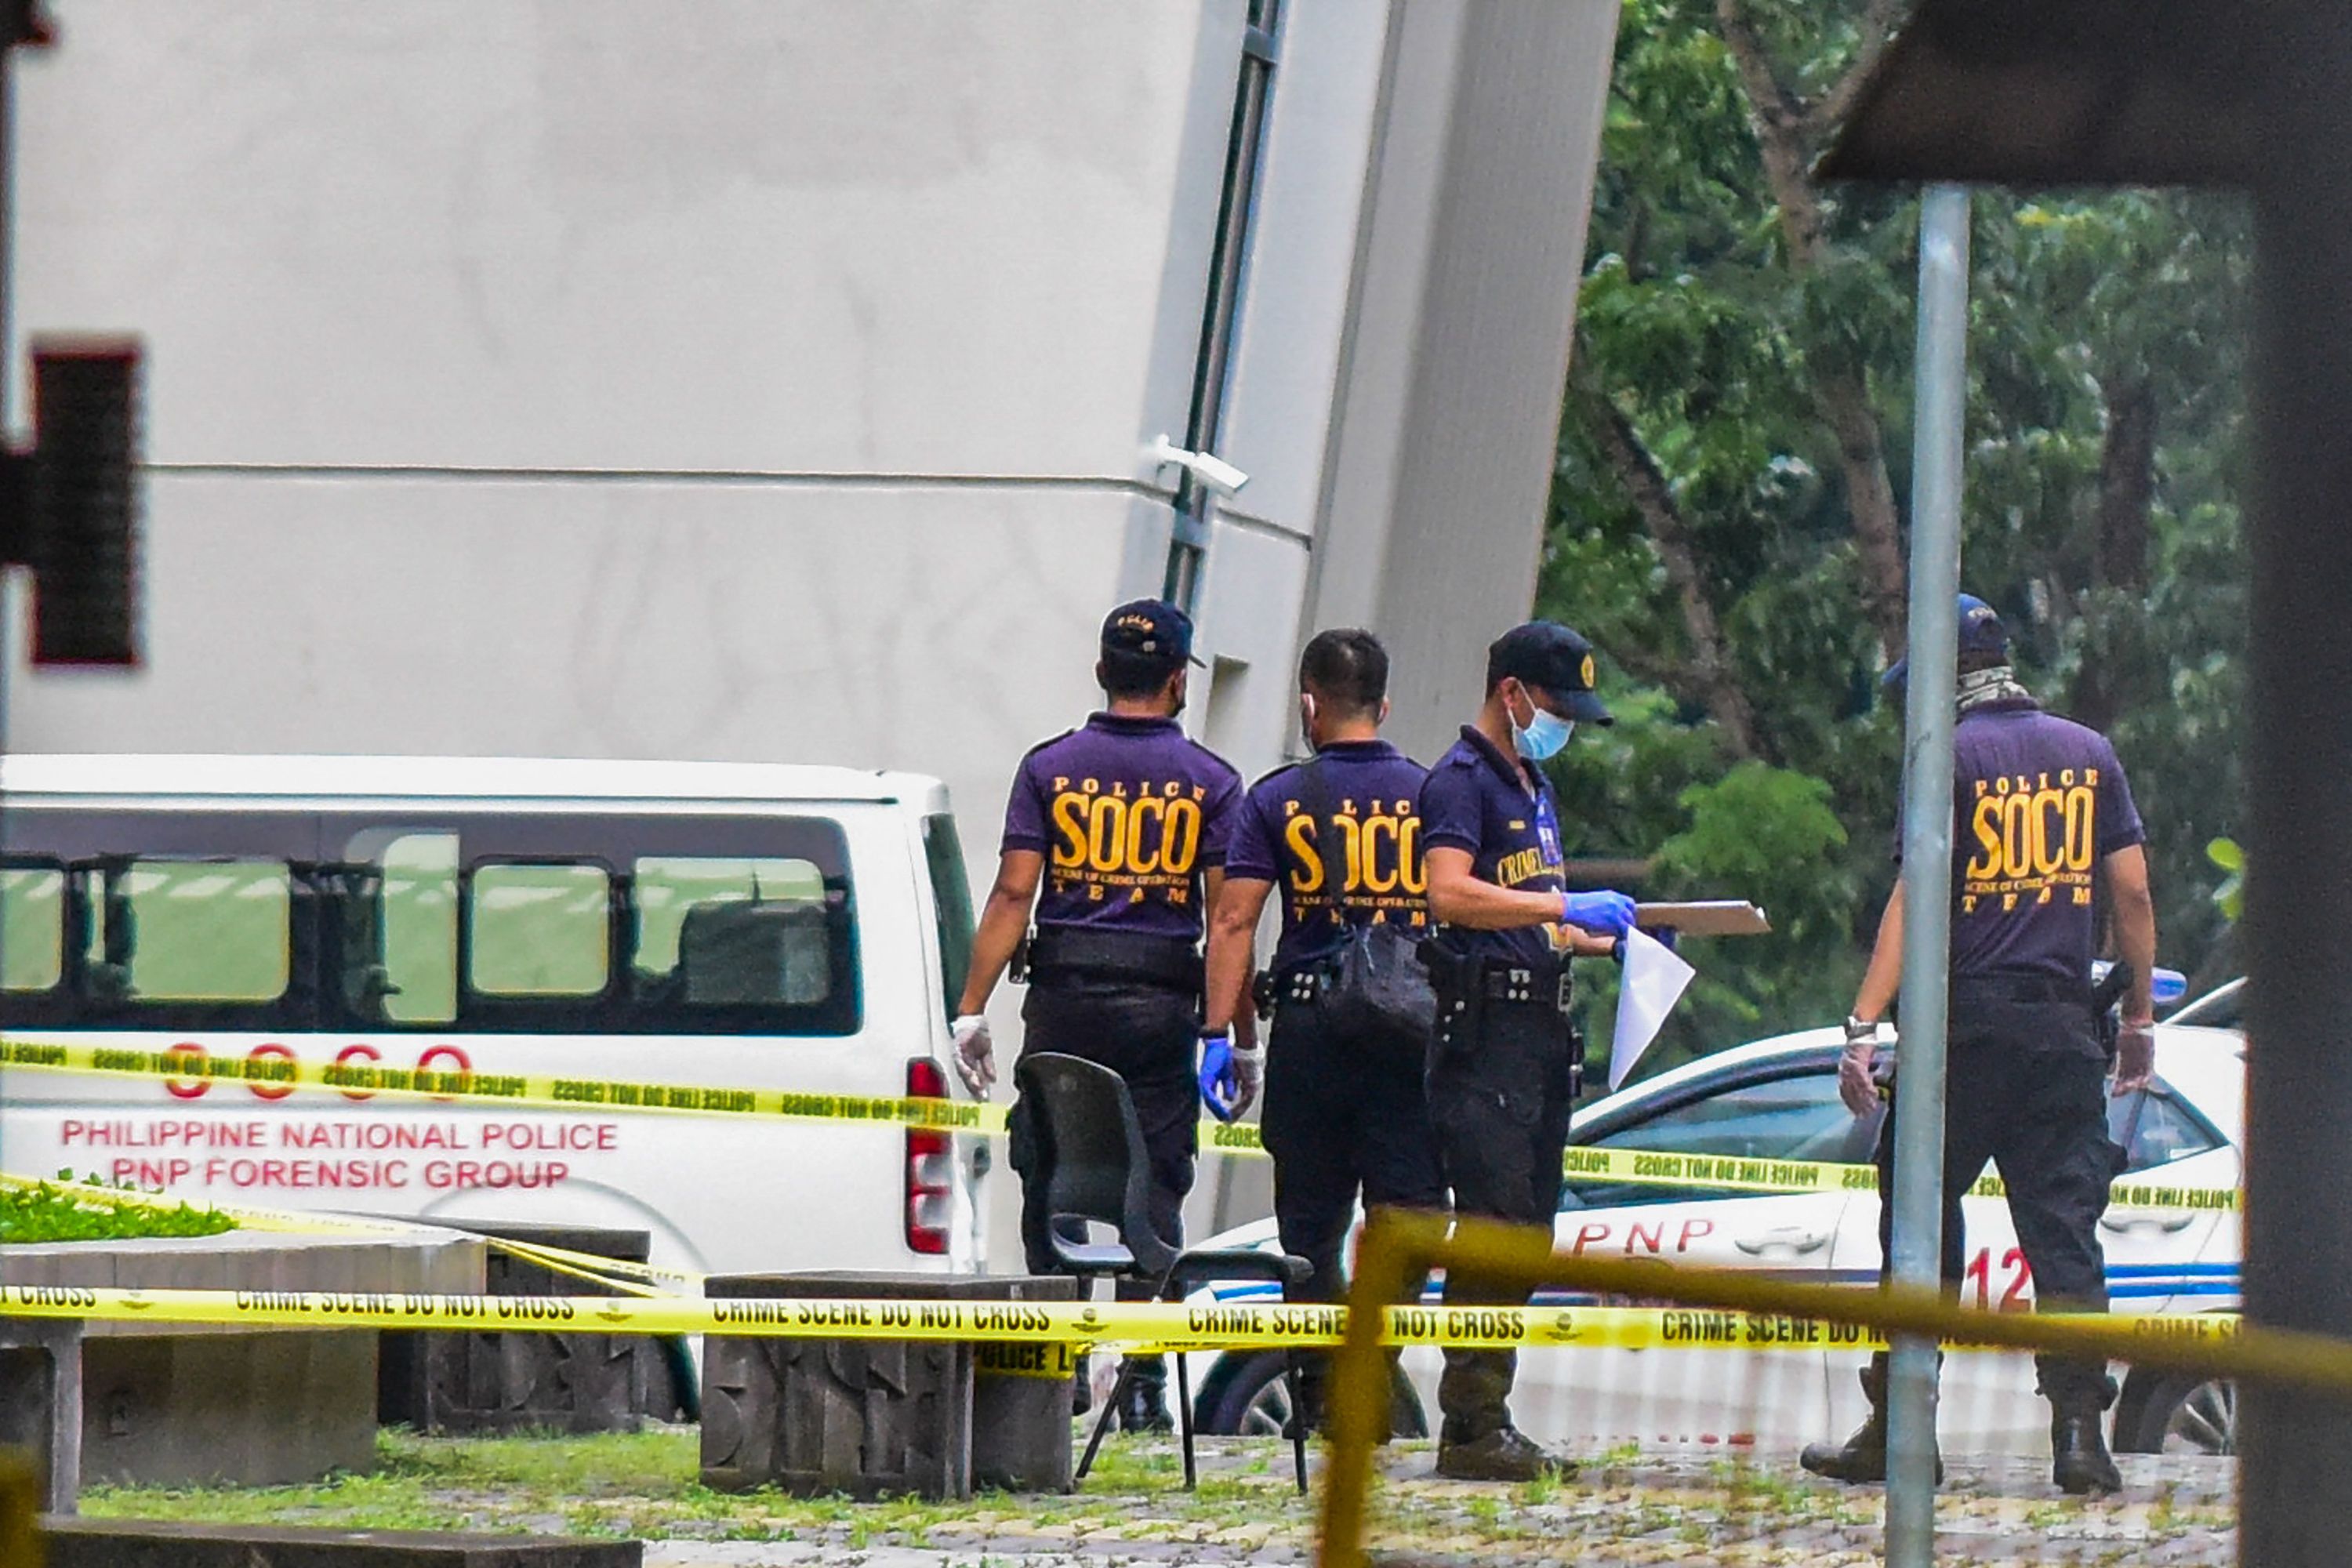 Police officers work at the scene after three people were killed in a shooting at Ateneo de Manila University in Quezon City, suburban Manila, on 24 July 2022